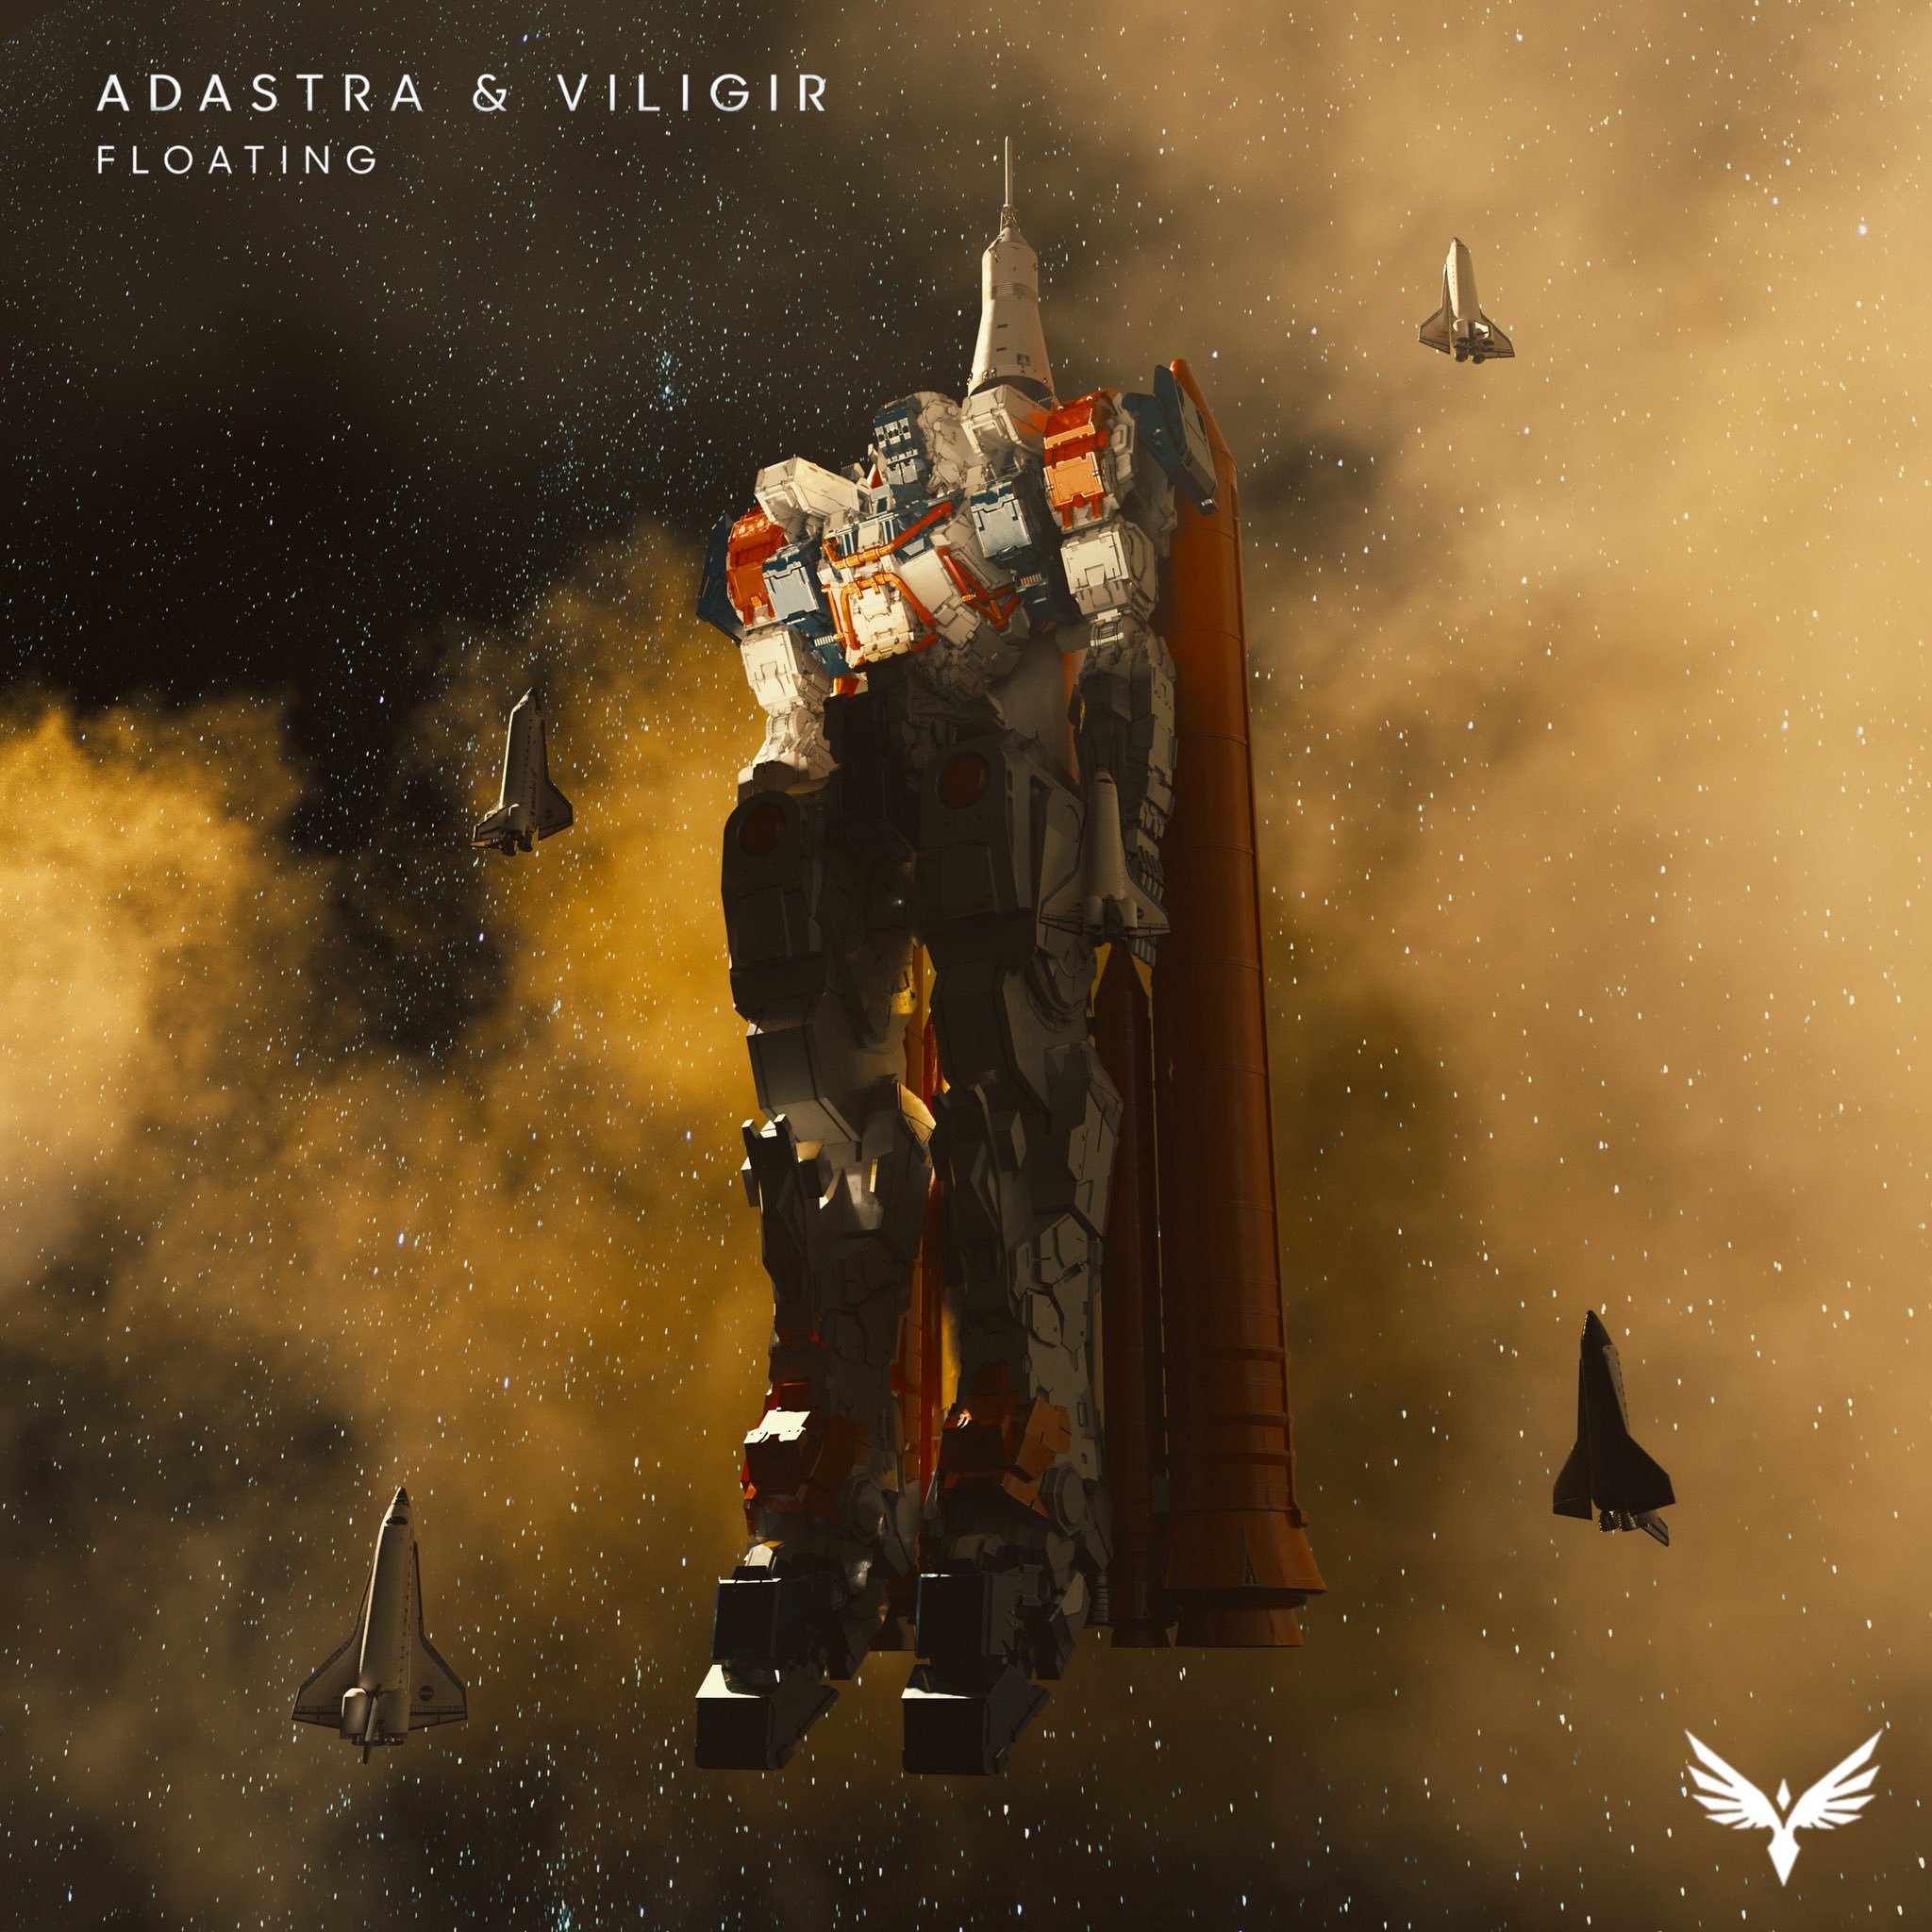 FEATURED LOCAL MUSIC: Floating by Adastra & Viligir